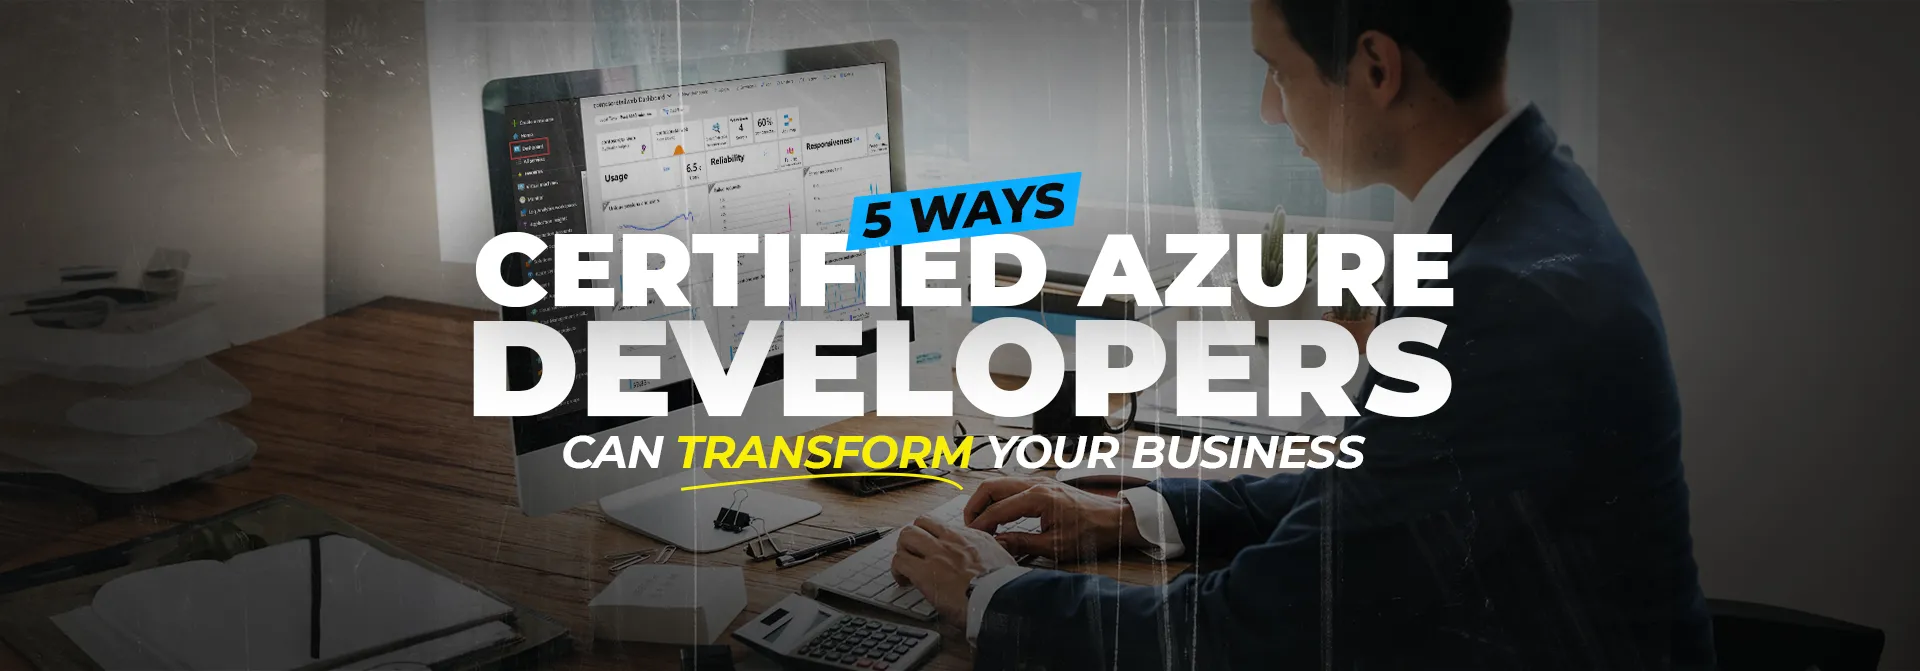 5 ways certified azure developers can transform your business